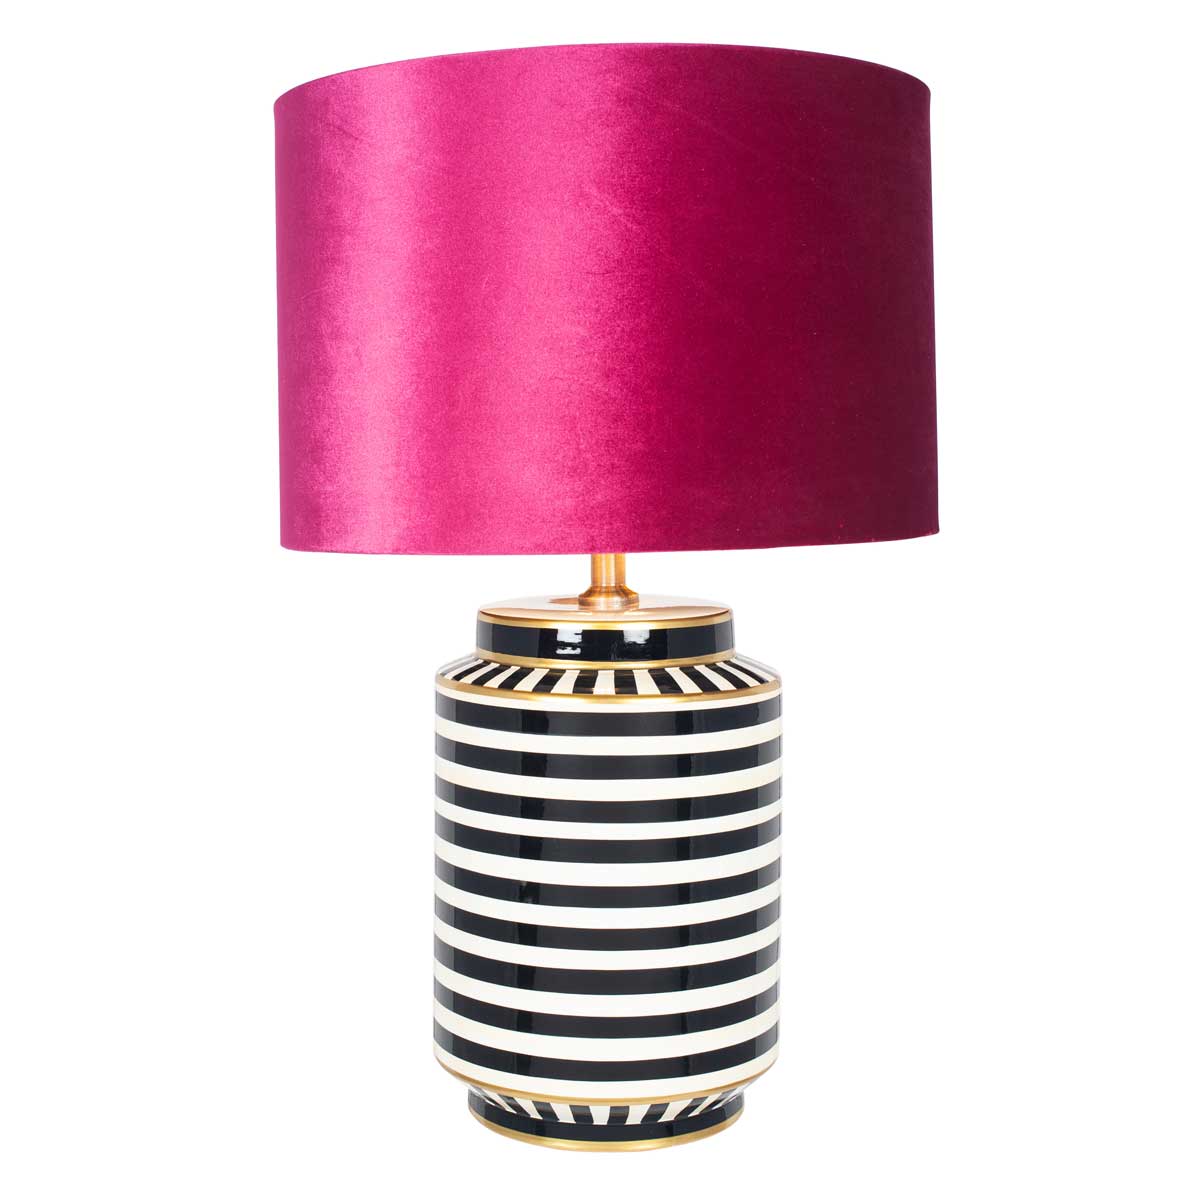 Black and white table lamp with pink cylinder shade